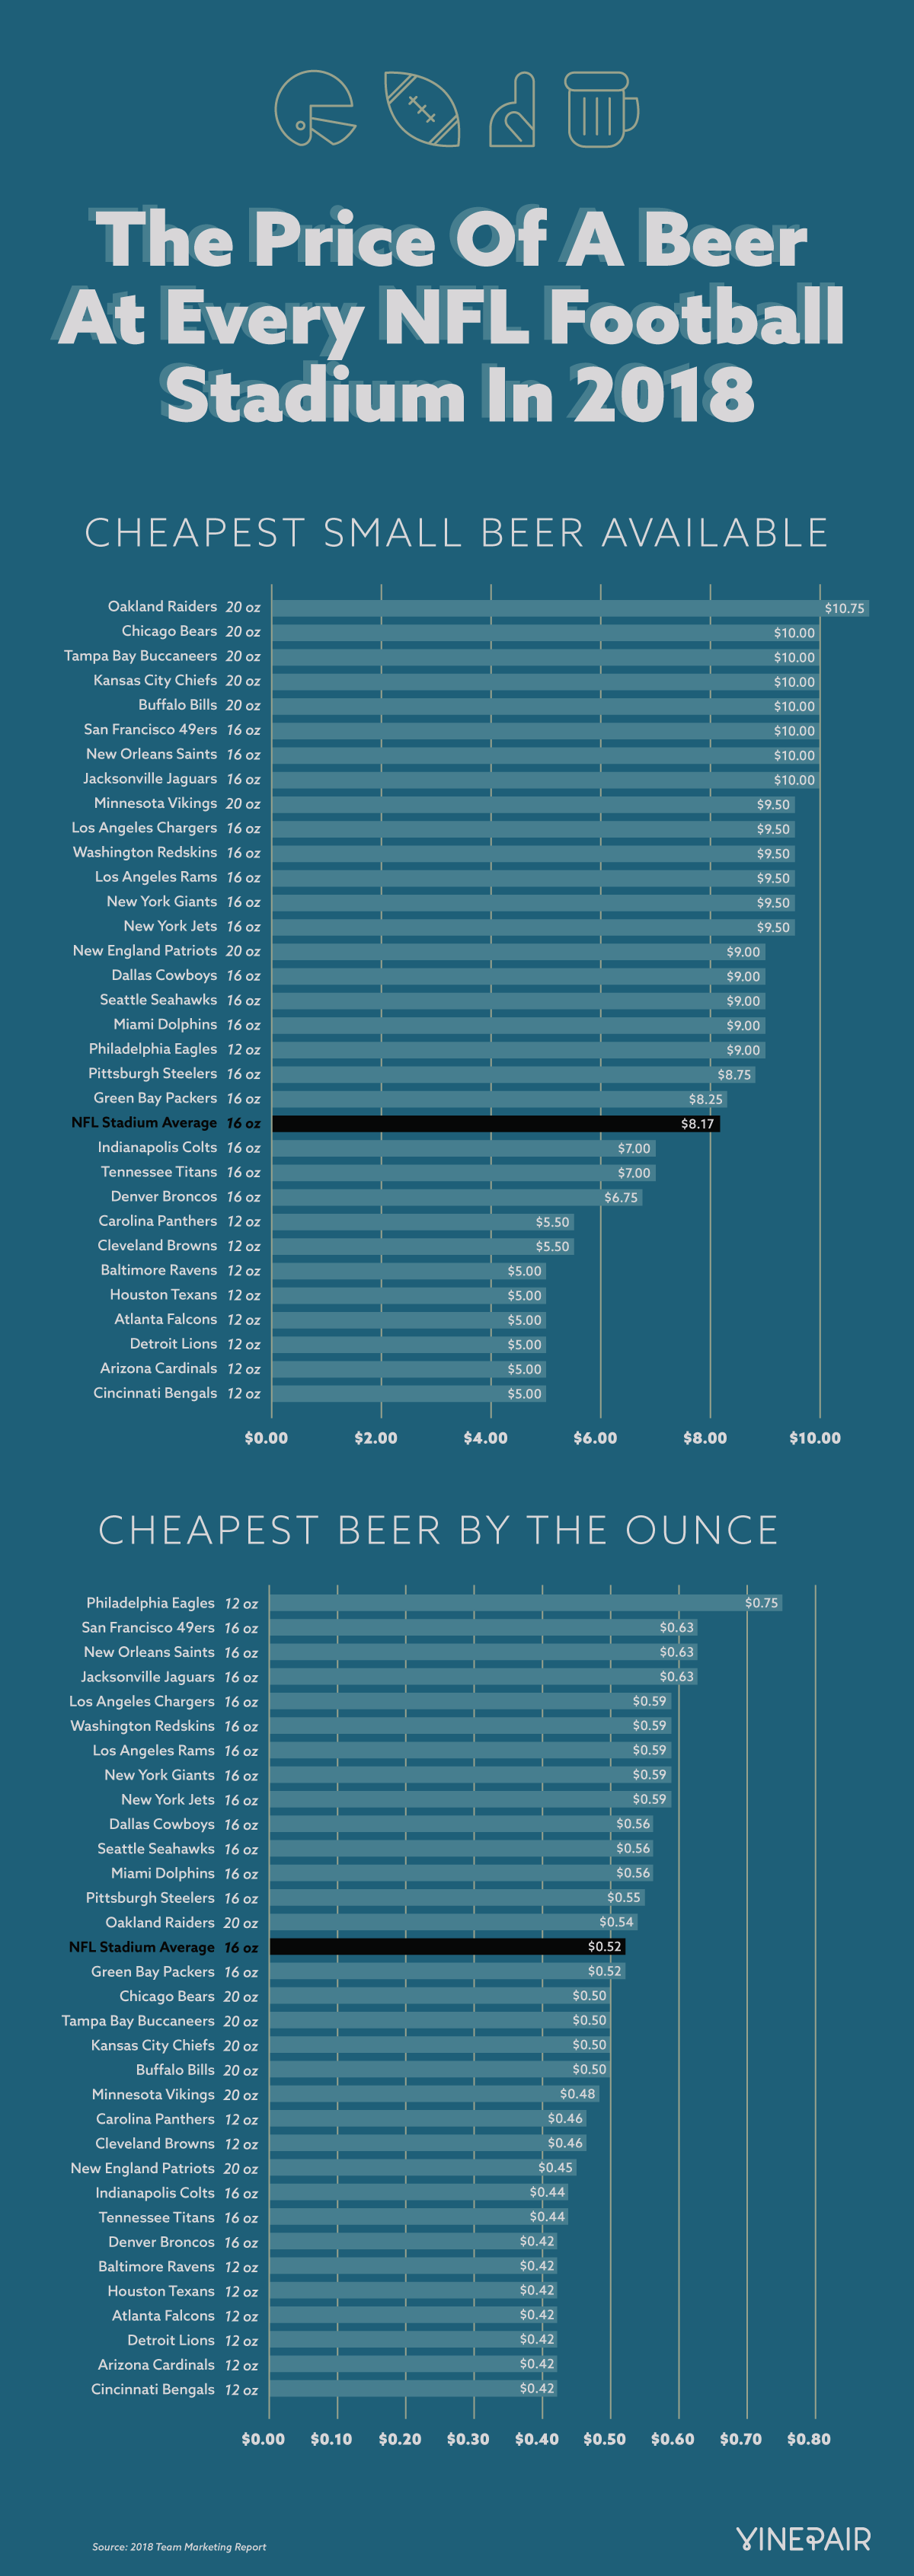 The Price Of A Beer At Every NFL Football Stadium In 2018